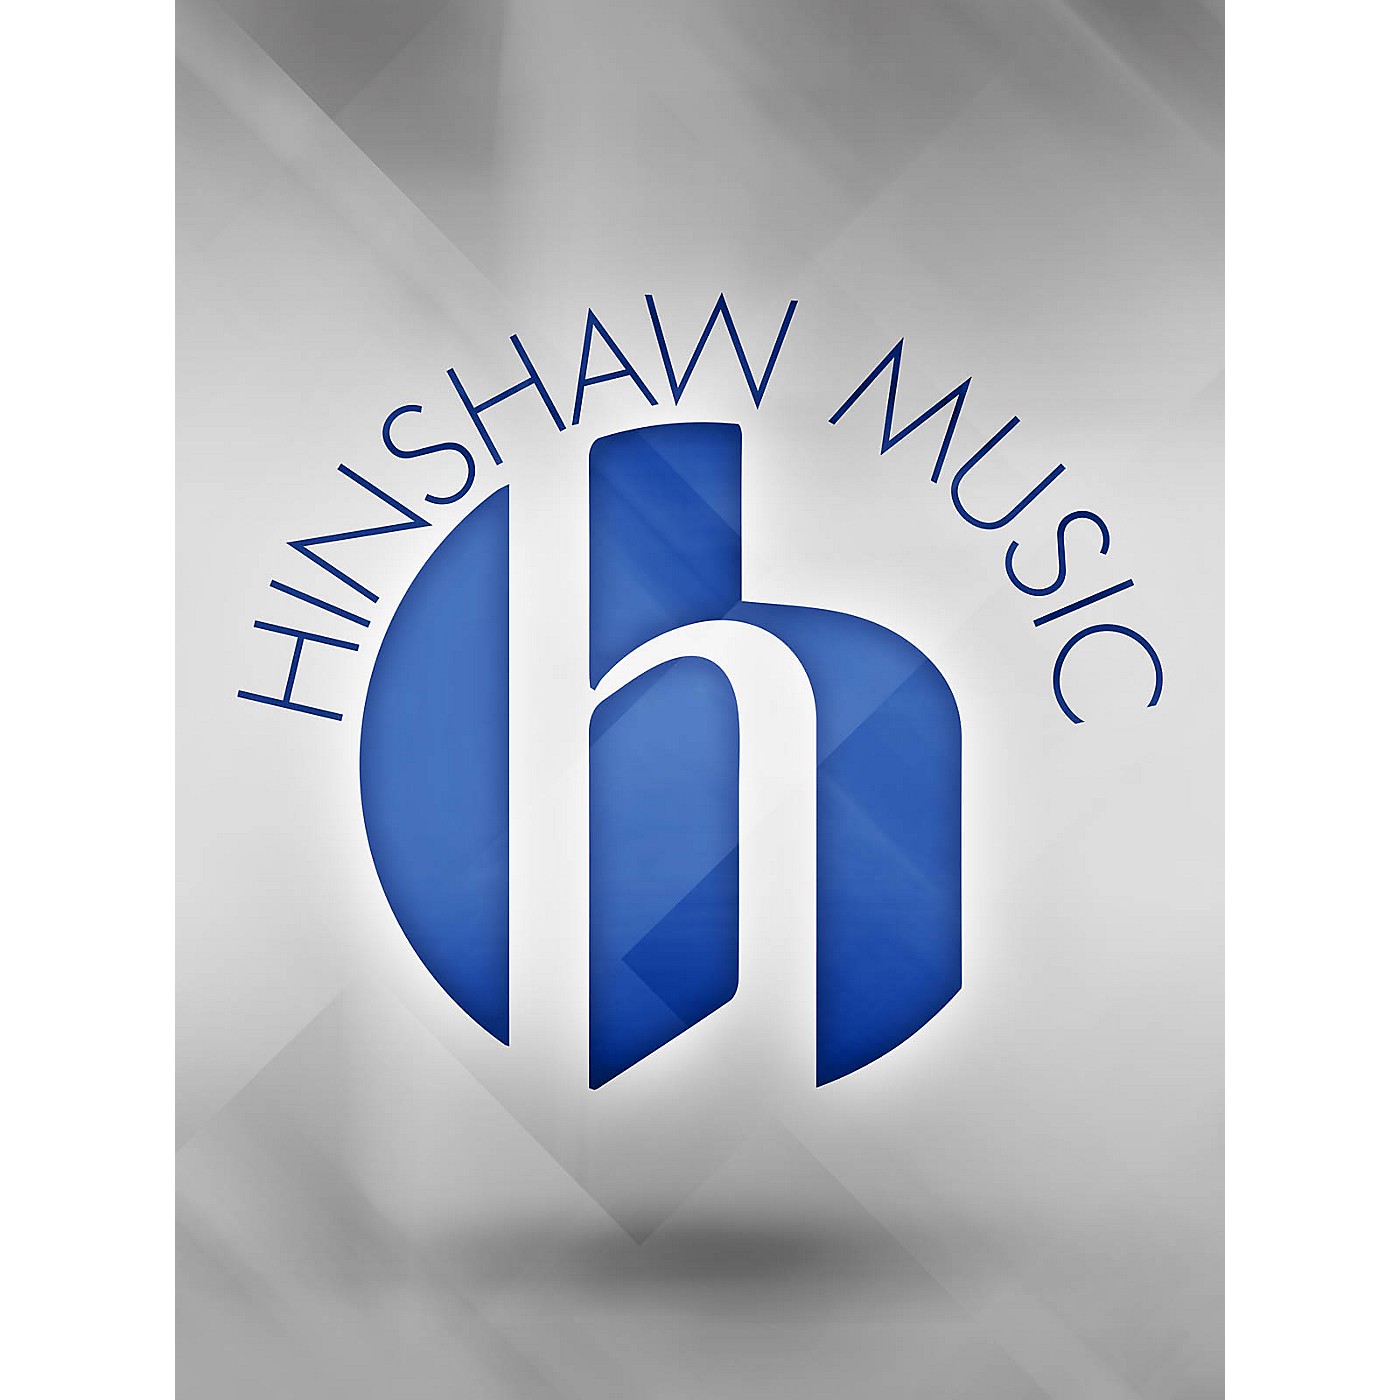 Hinshaw Music A Pathway for My Feet SATB Composed by Hank Beebe thumbnail